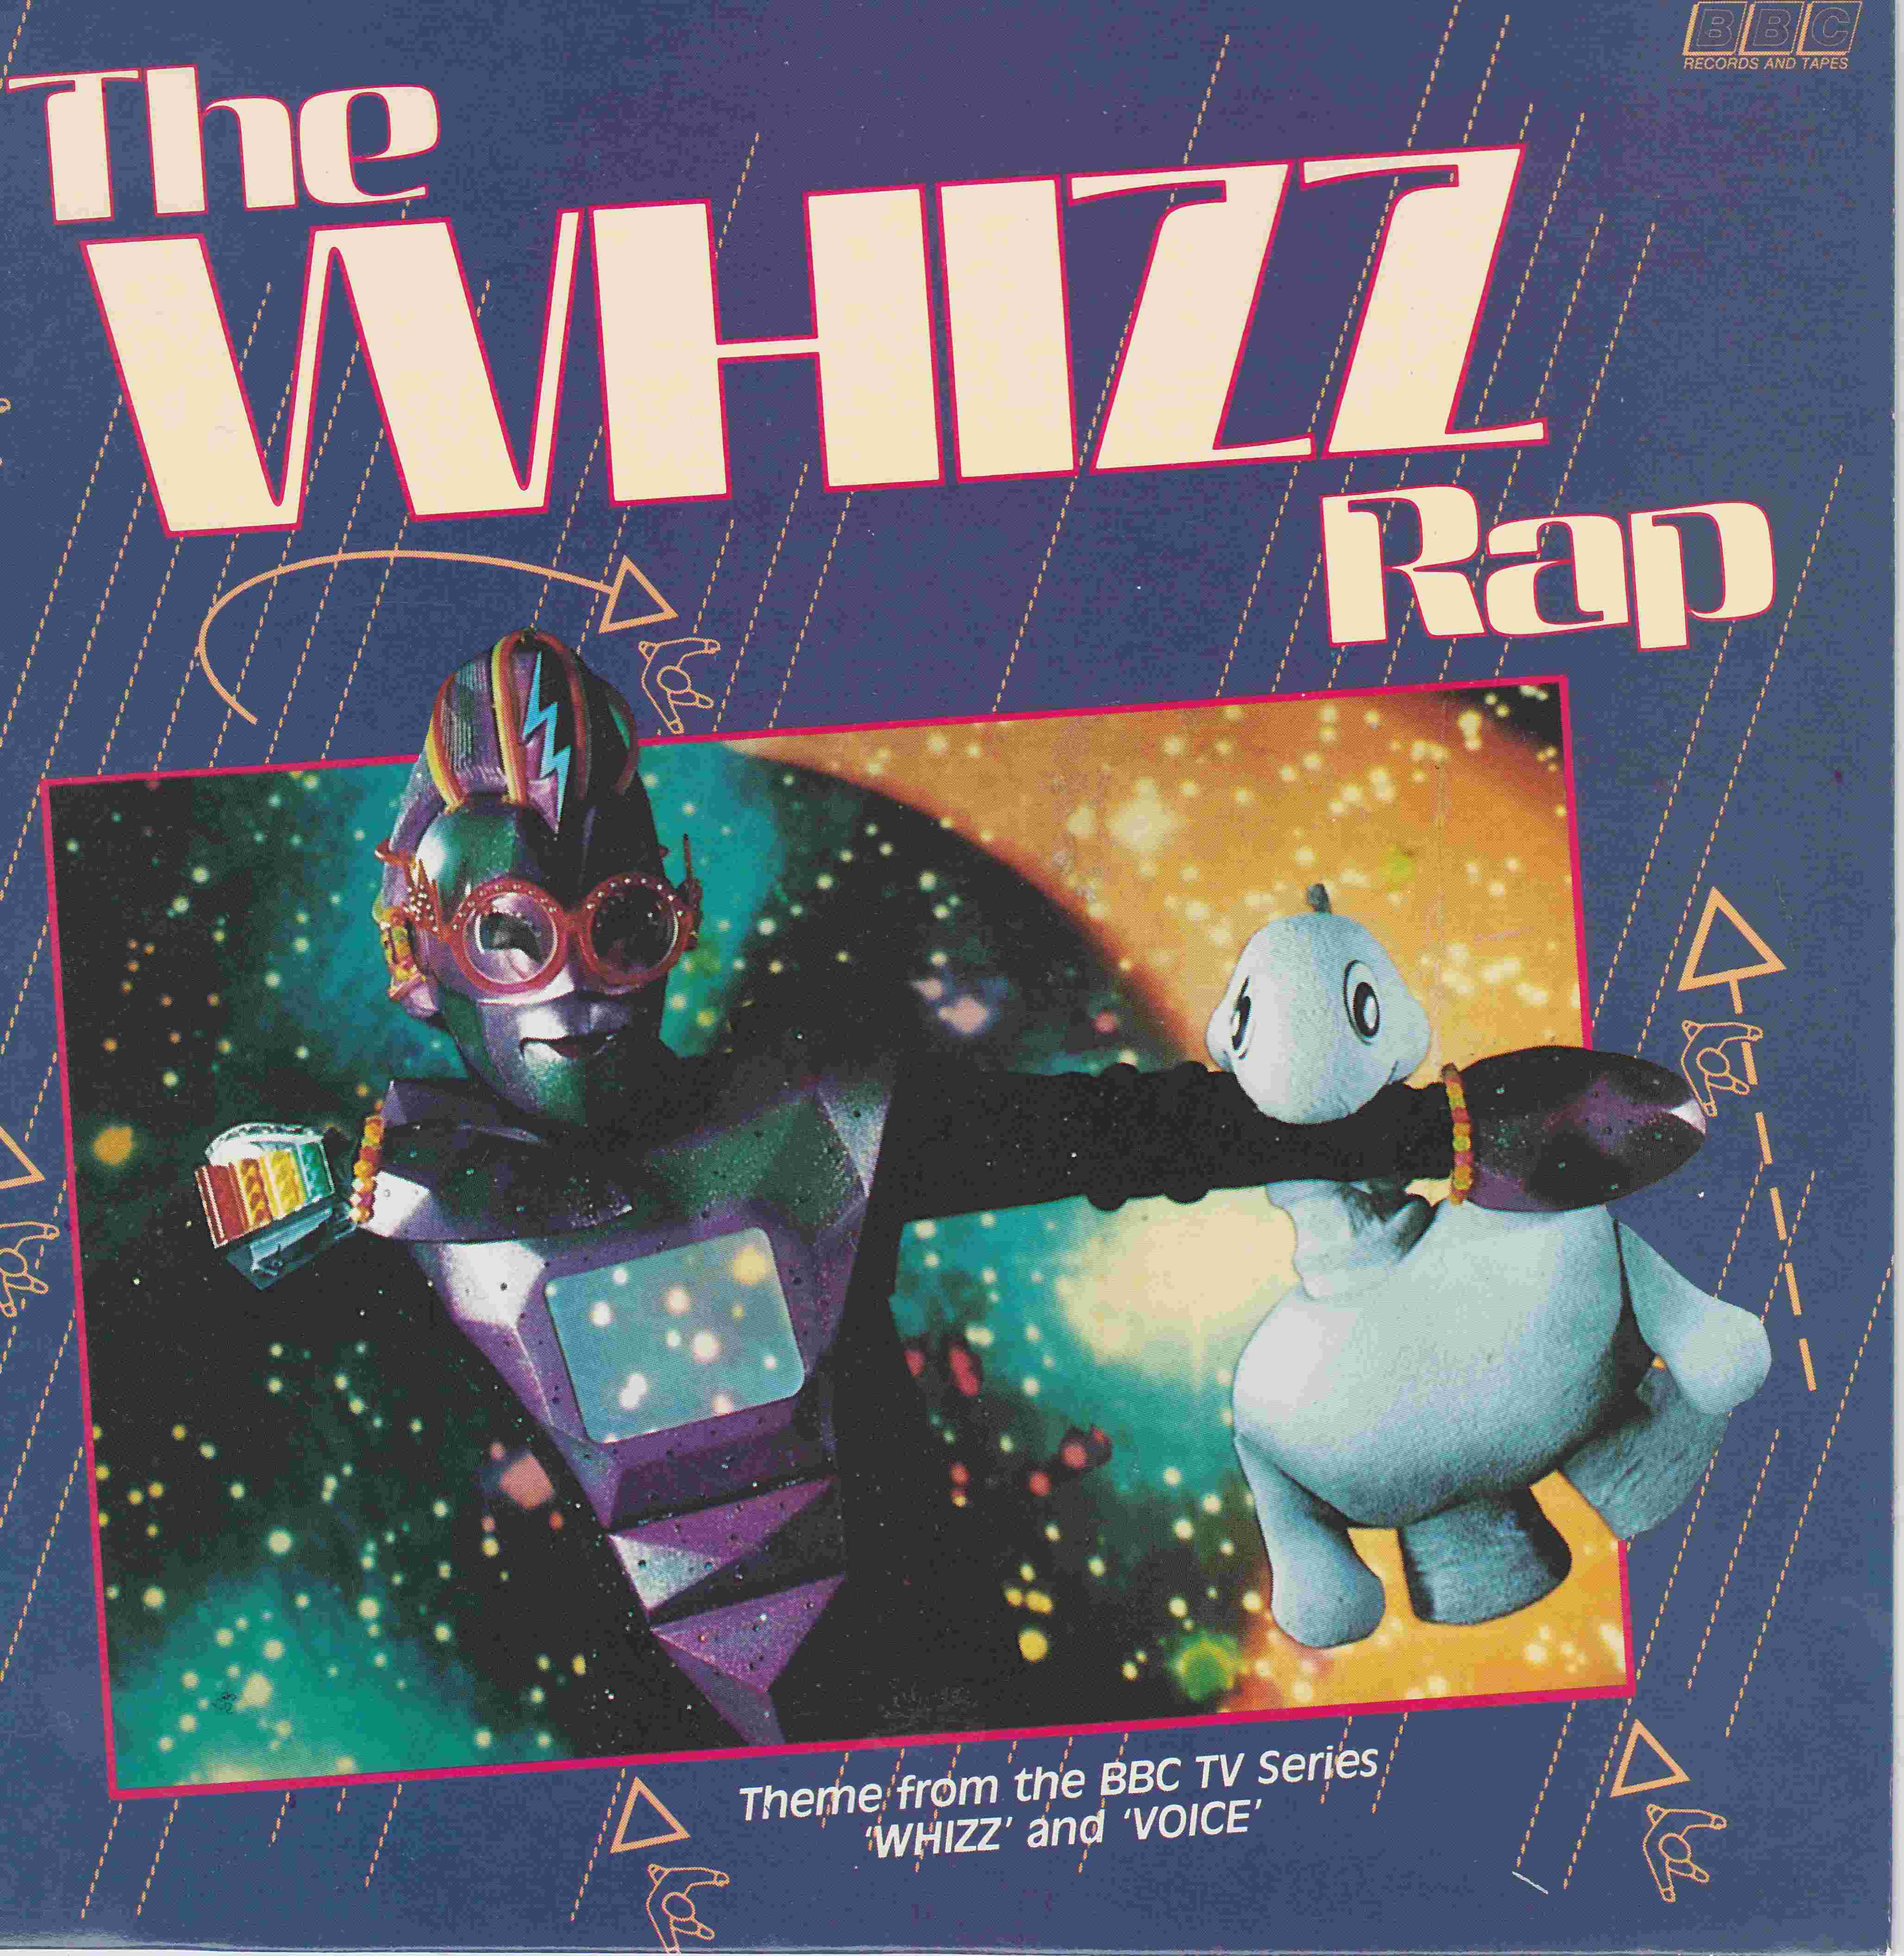 Picture of RESL 166 The Whizz rap (Whizz and Voice) by artist Whizz and Voice from the BBC records and Tapes library